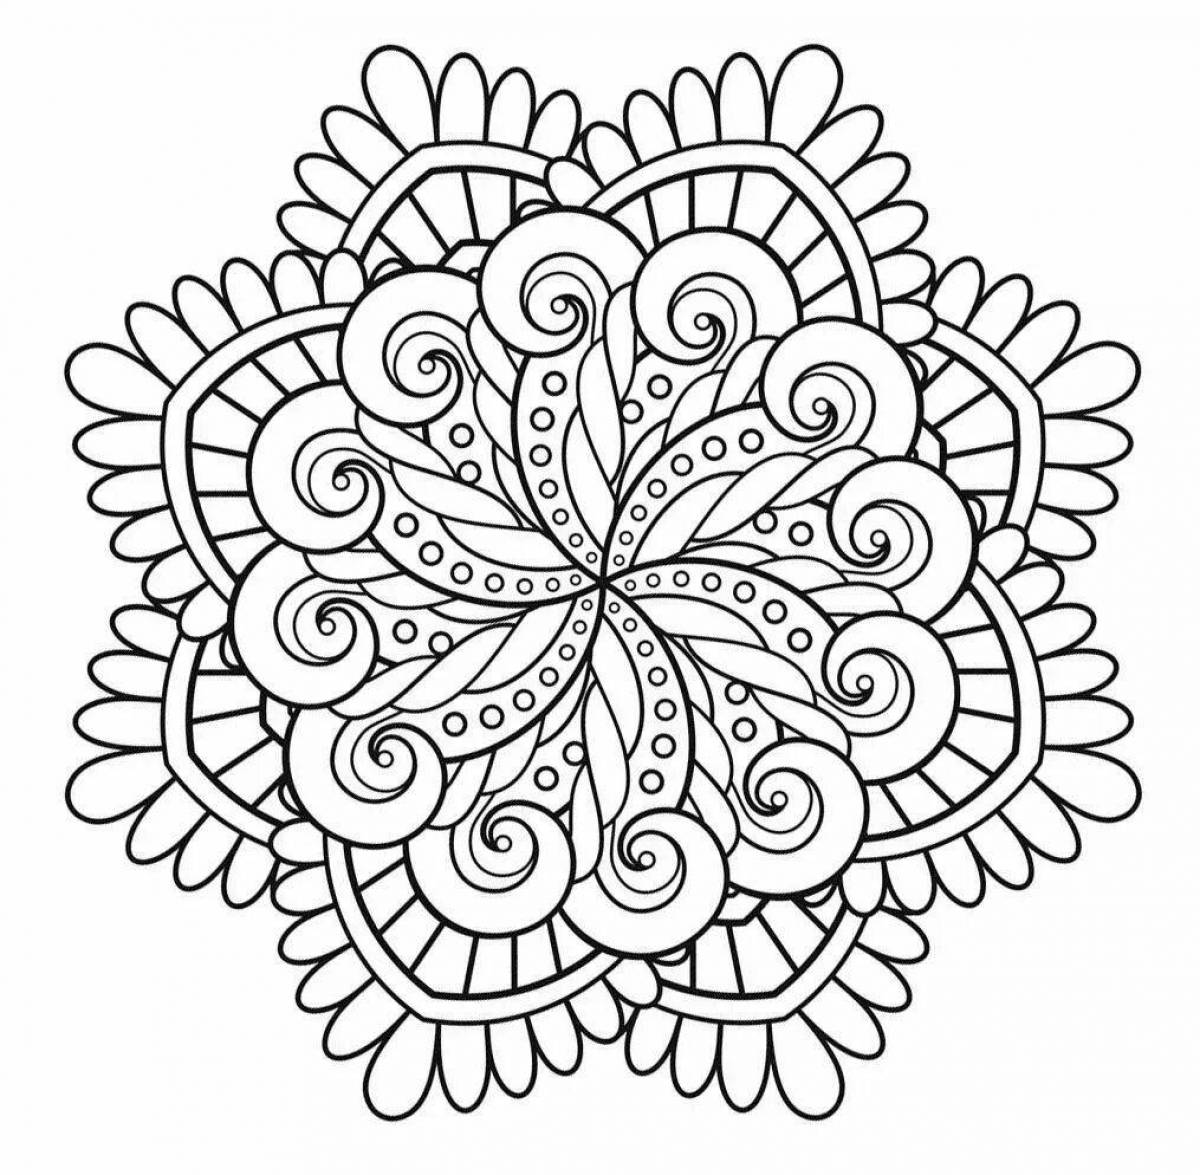 Shining light pattern coloring page